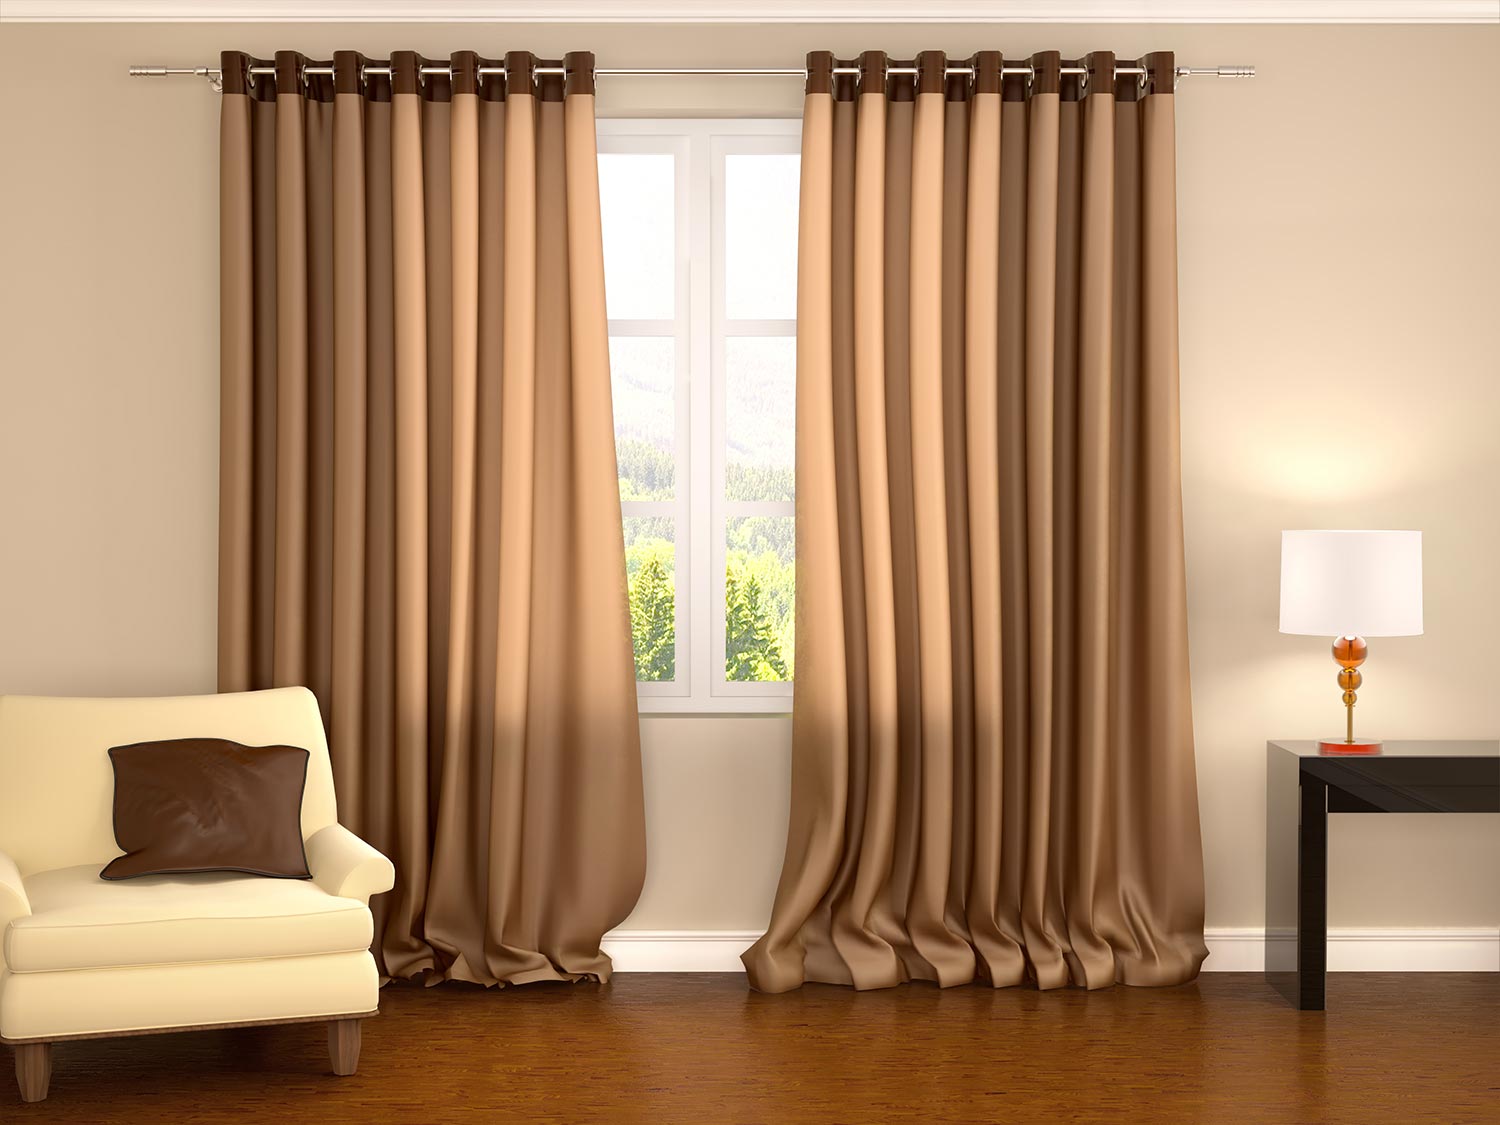 Illustration of brown curtains in warm interior